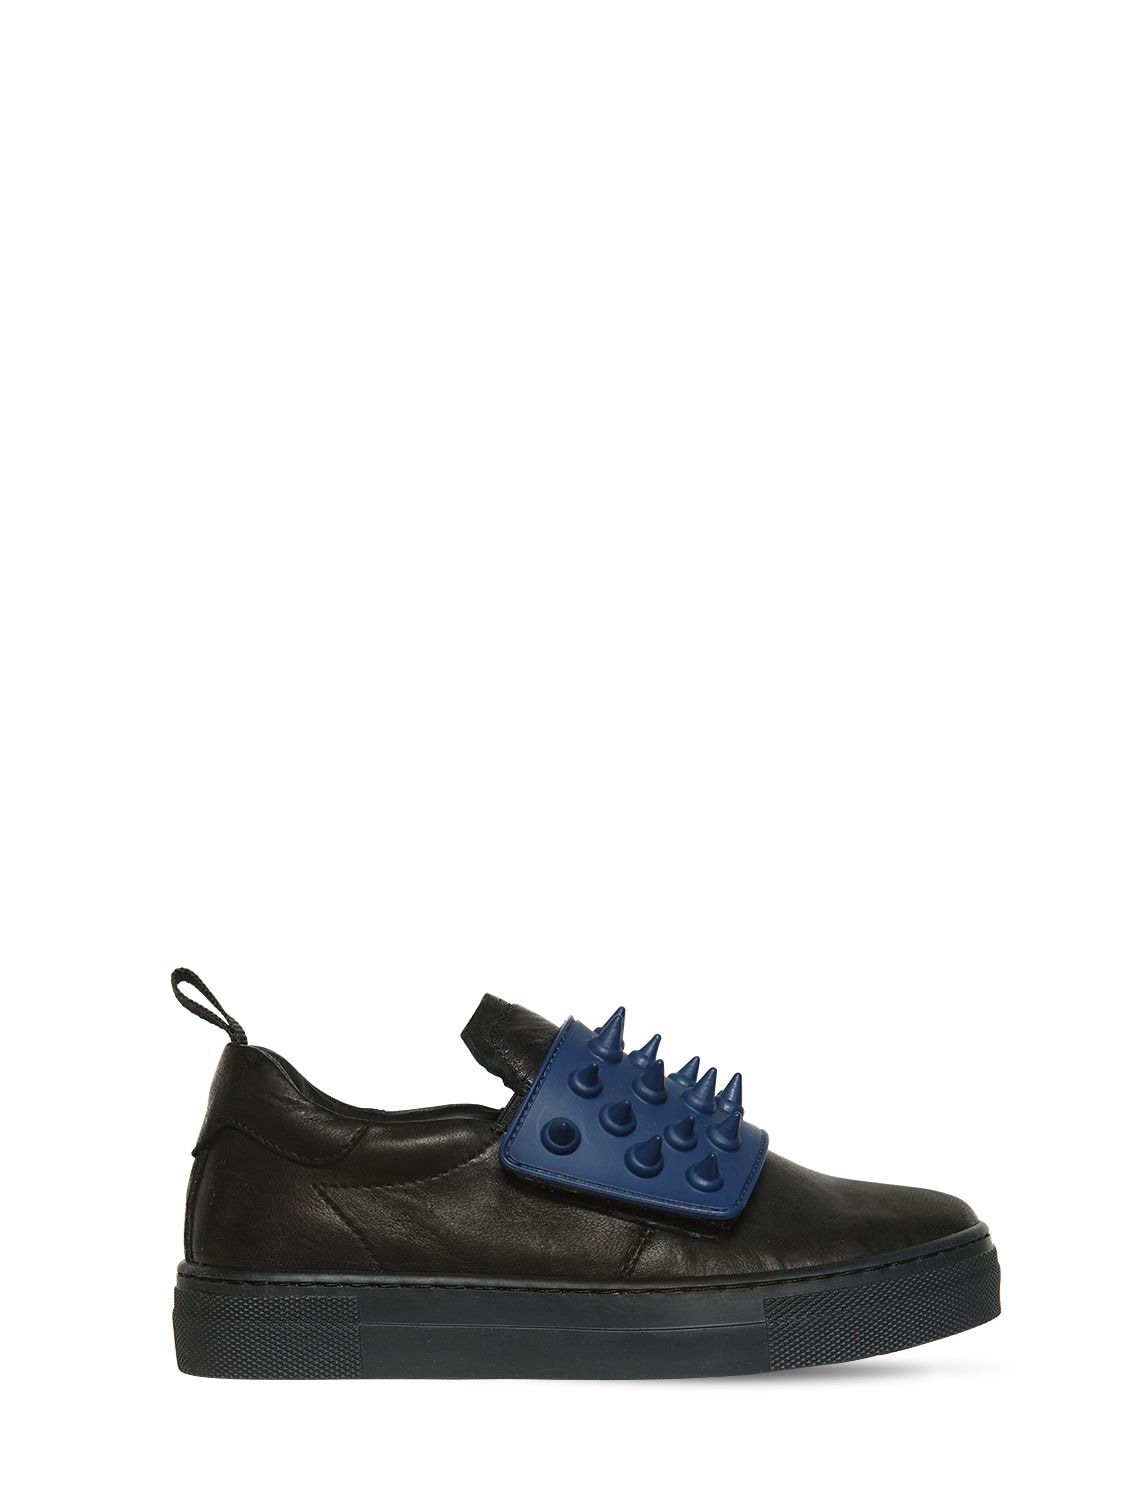 Am 66 Kids' Spiked Leather Slip-on Trainers In Black,navy